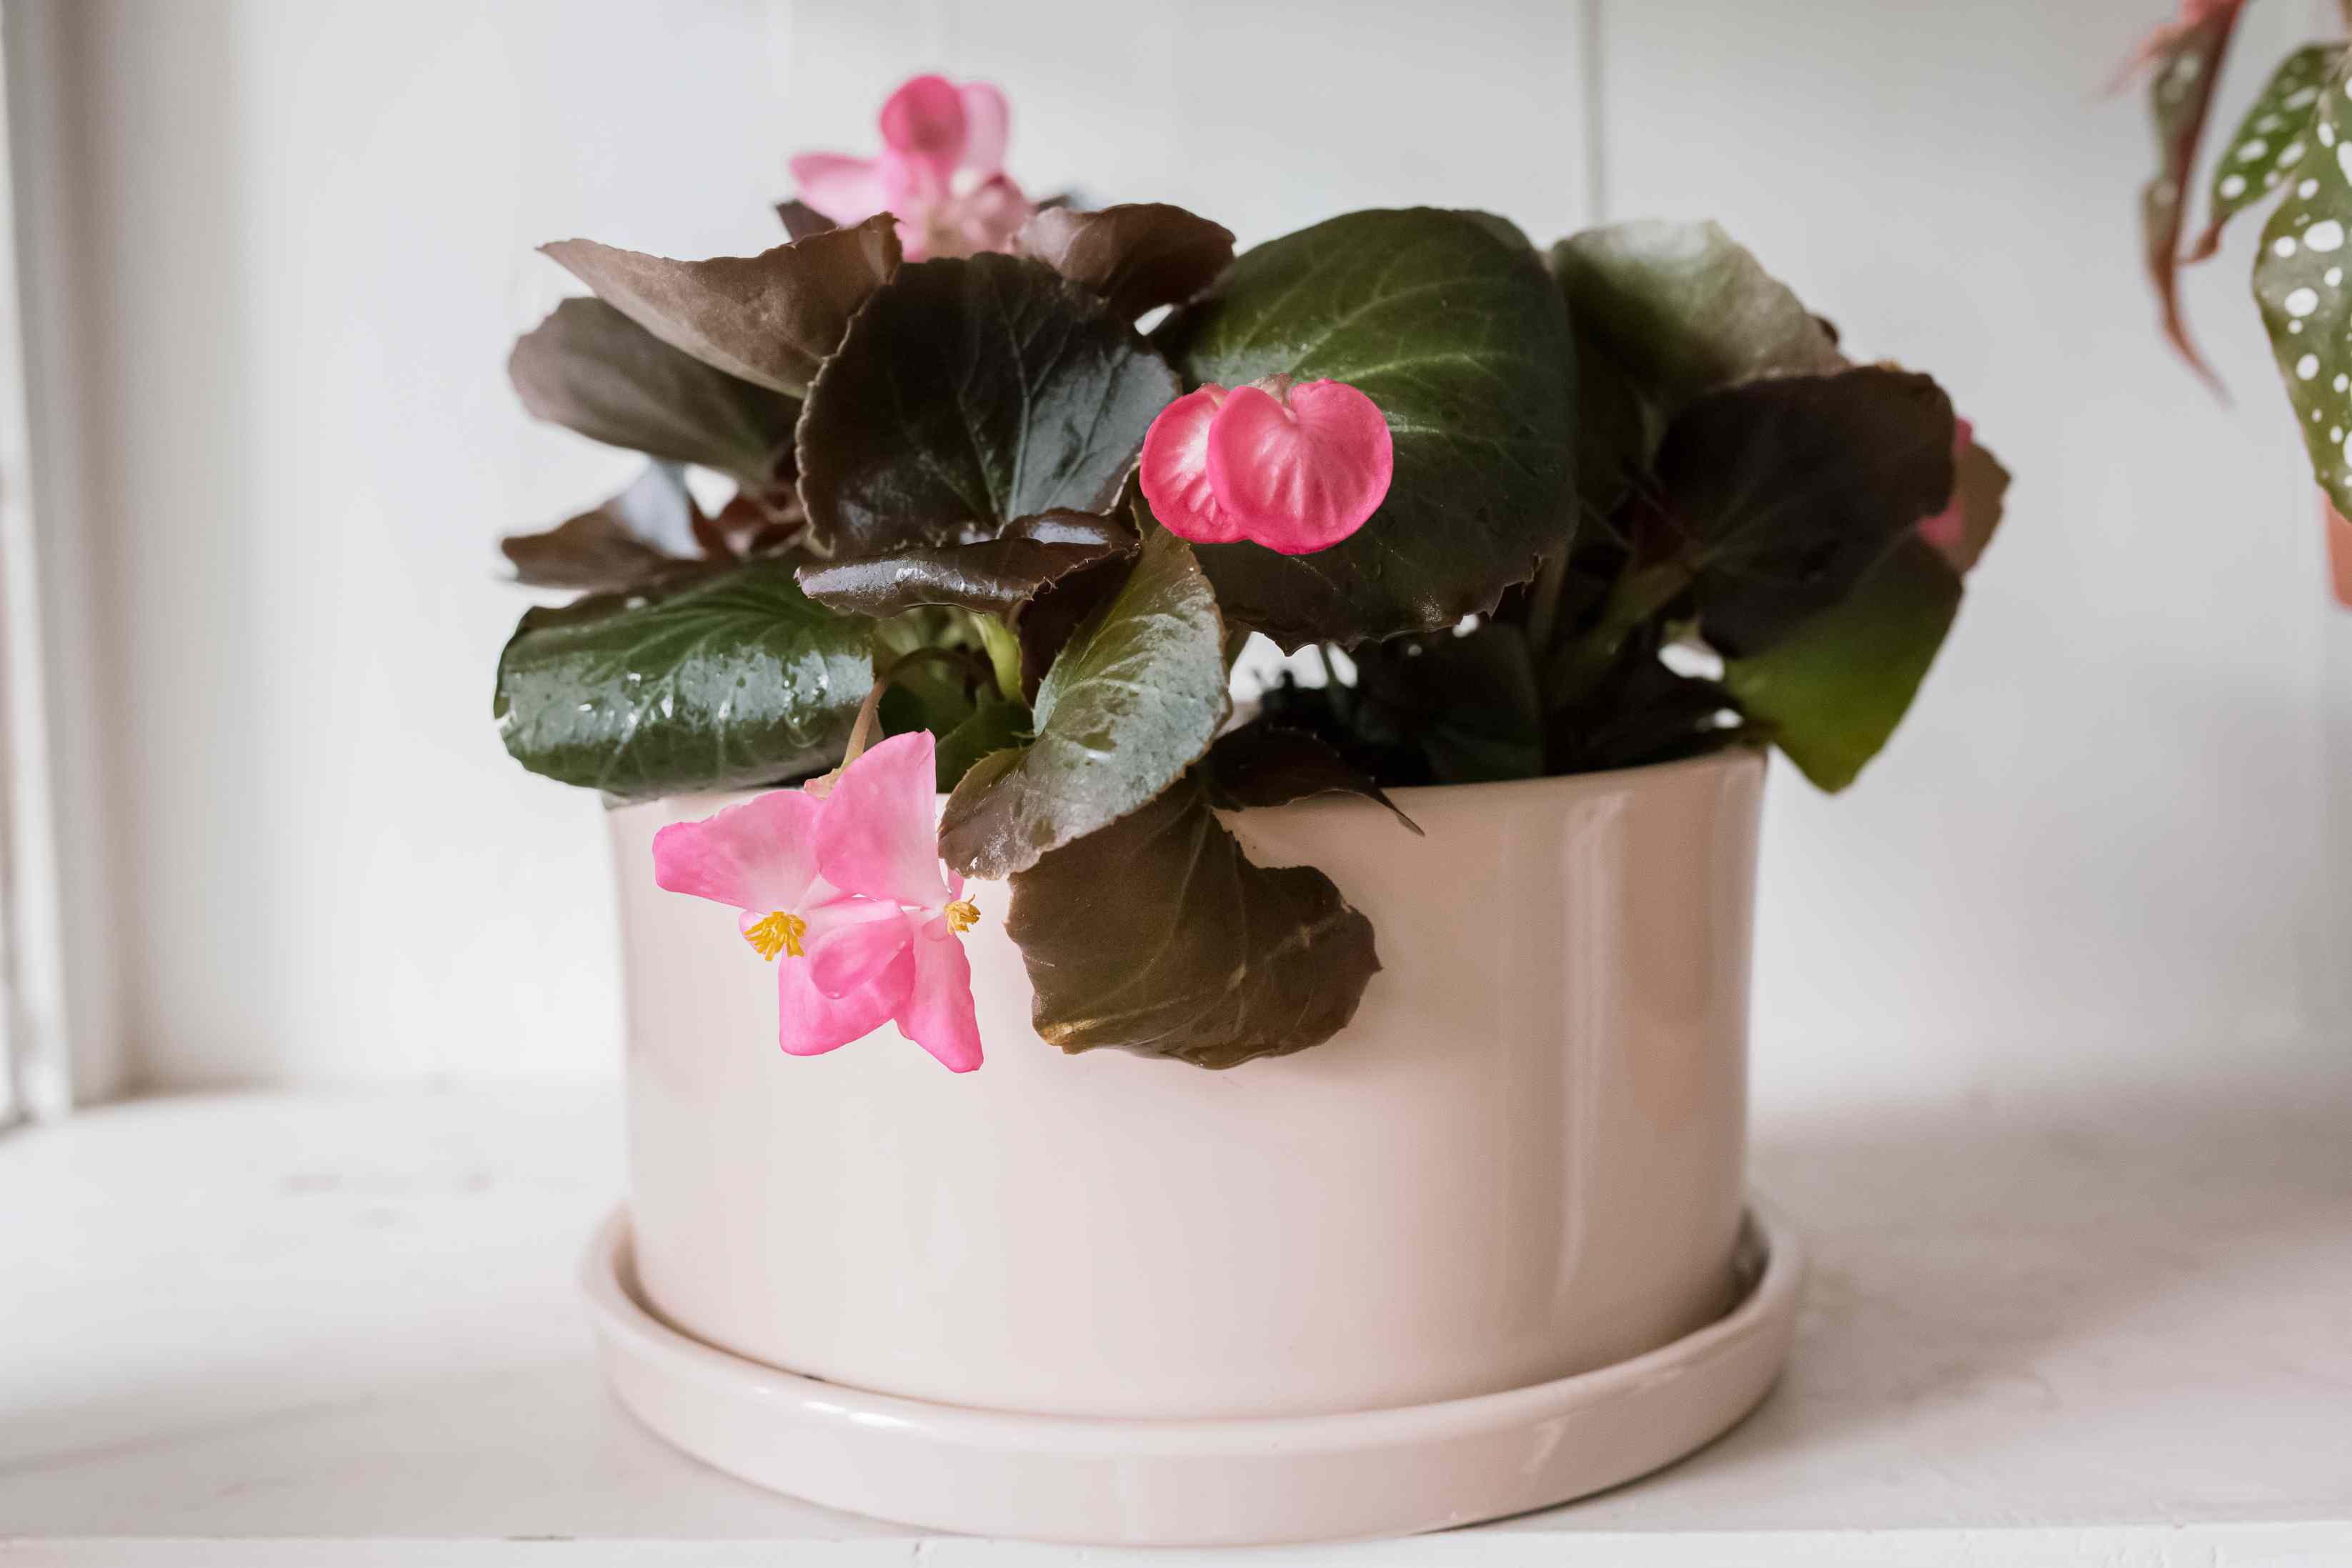 How To Grow Begonia From Seed